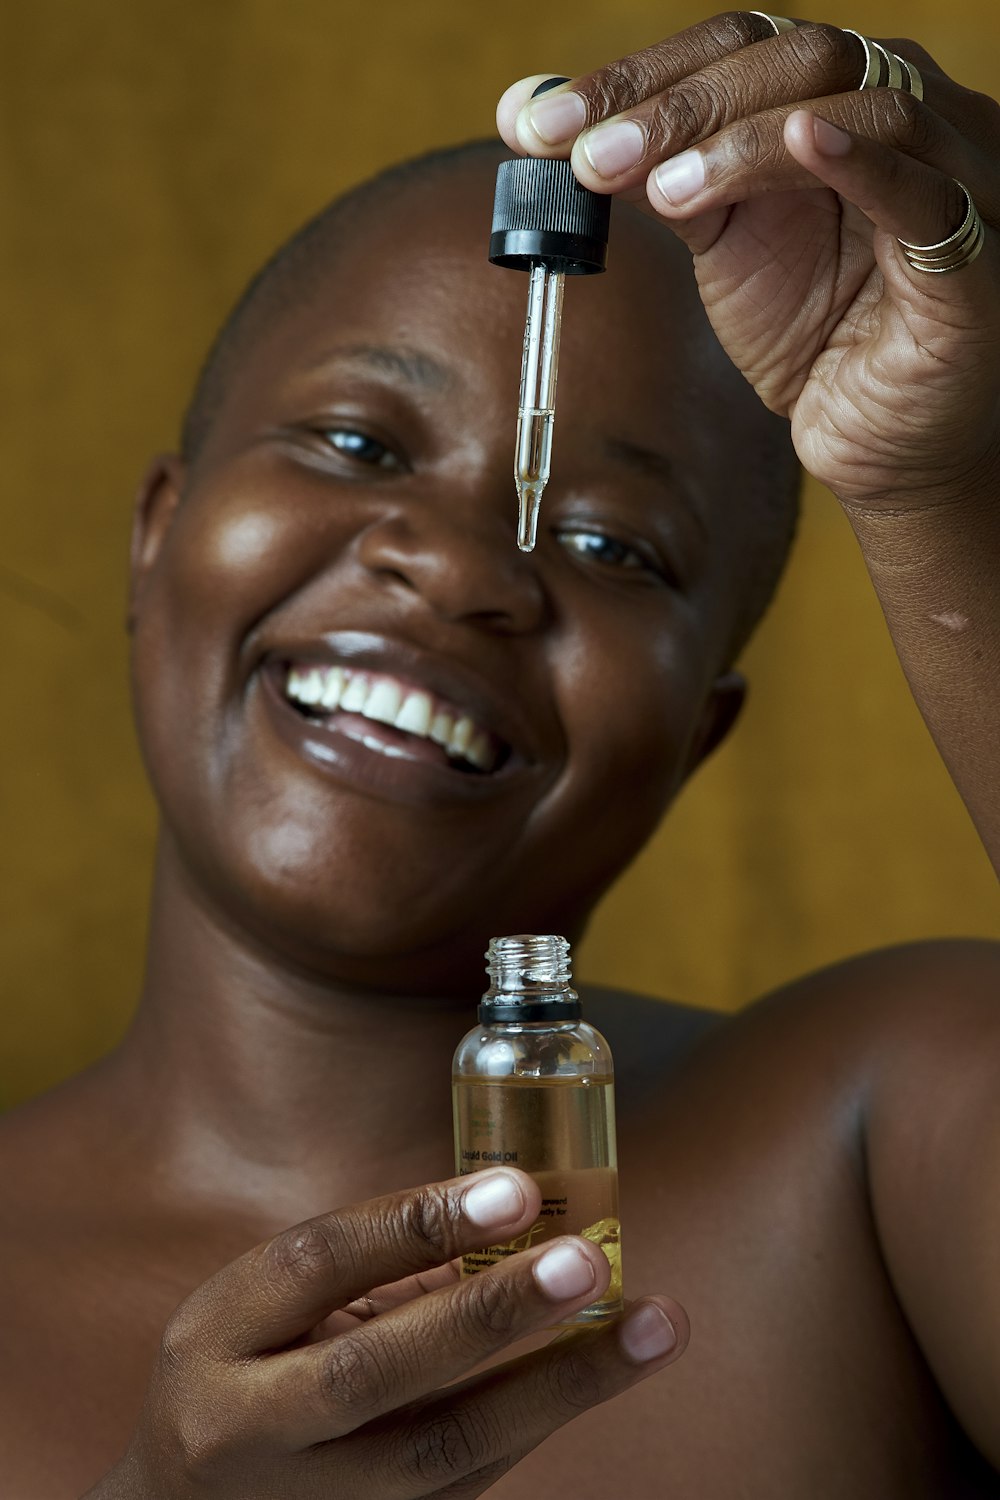 a smiling woman holding a bottle of medicine